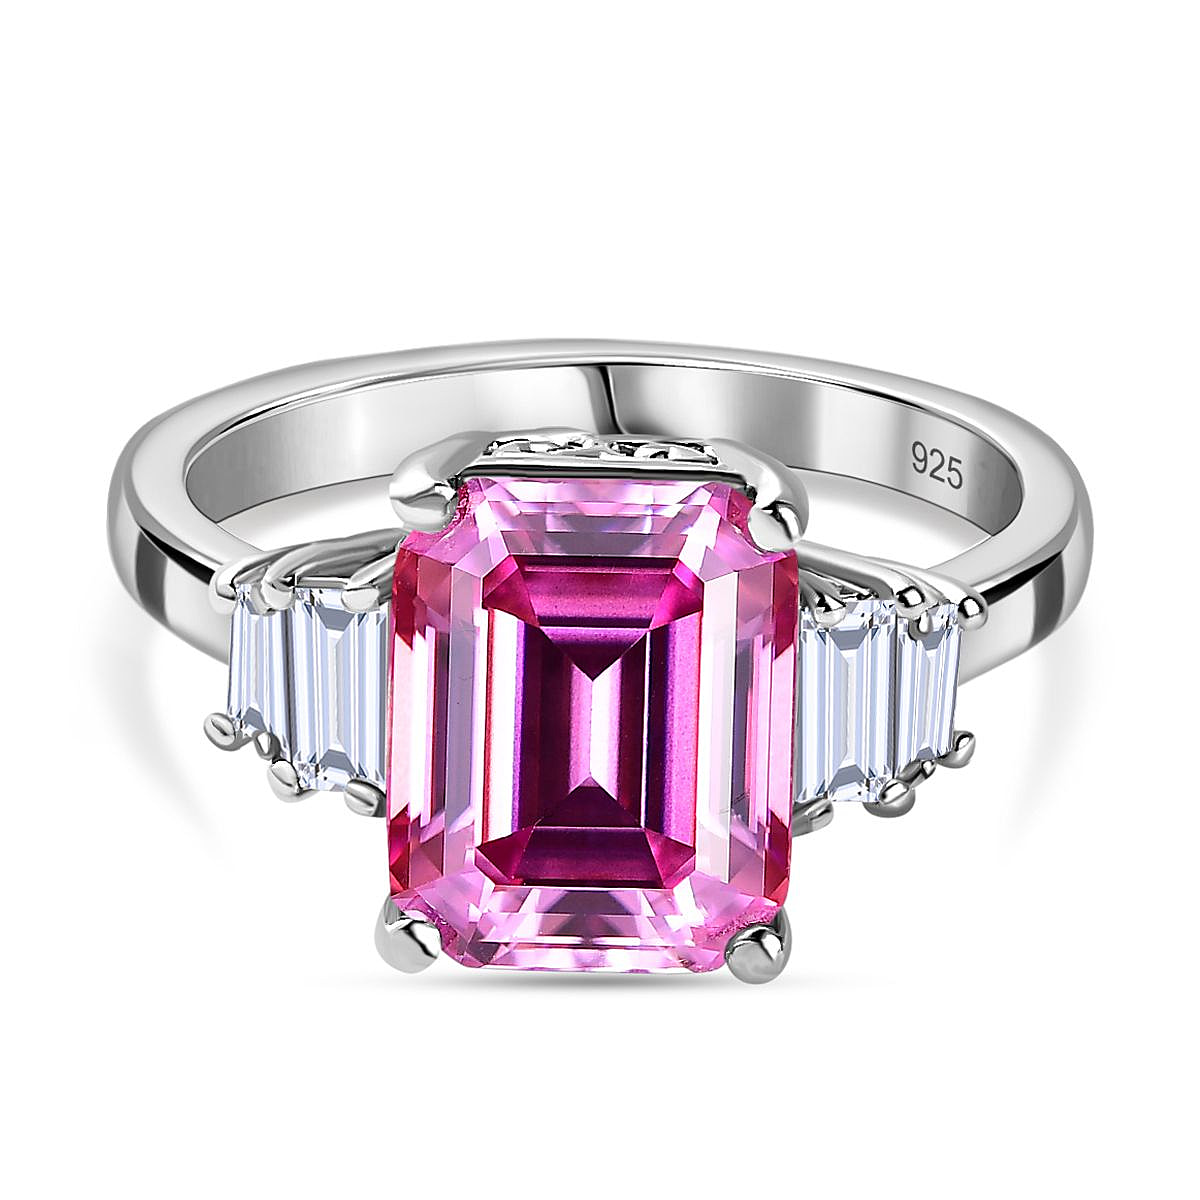 First Time Ever - Pink & White Moissanite (Octagon Cut) Ring in Platinum Overlay Sterling Silver 3.92 Ct.